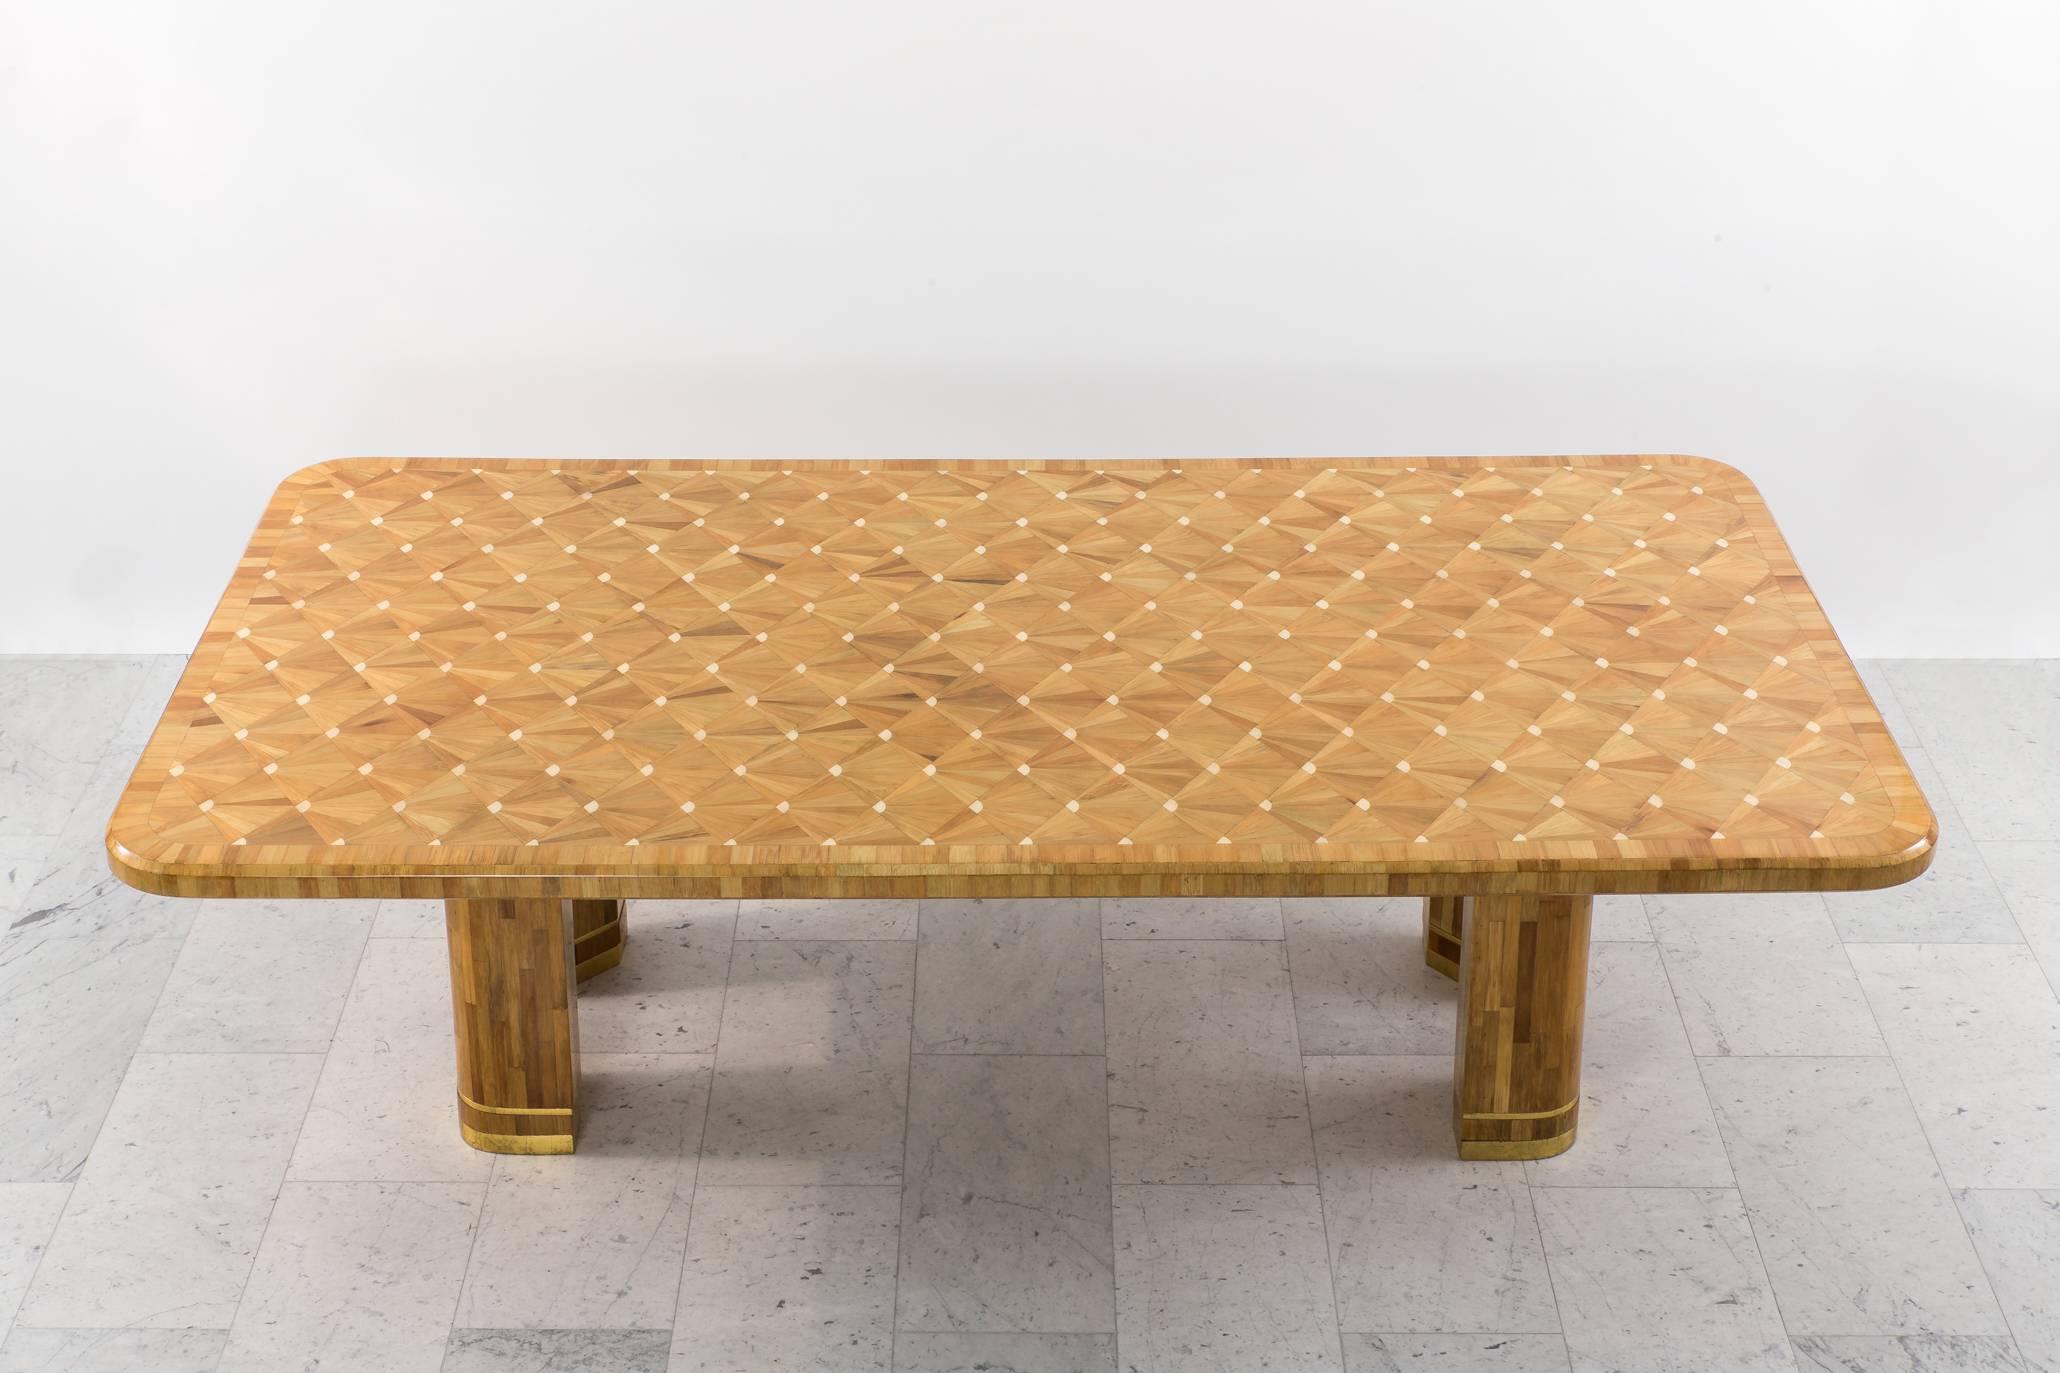 This magnificent table, executed in raffia wood marquetry, features a delicate bone inlay taking the form of fans across its lacquered surface. Standing on four uniquely shaped pentagonal plinths, the decorative border bottom is gilded in a 24-karat